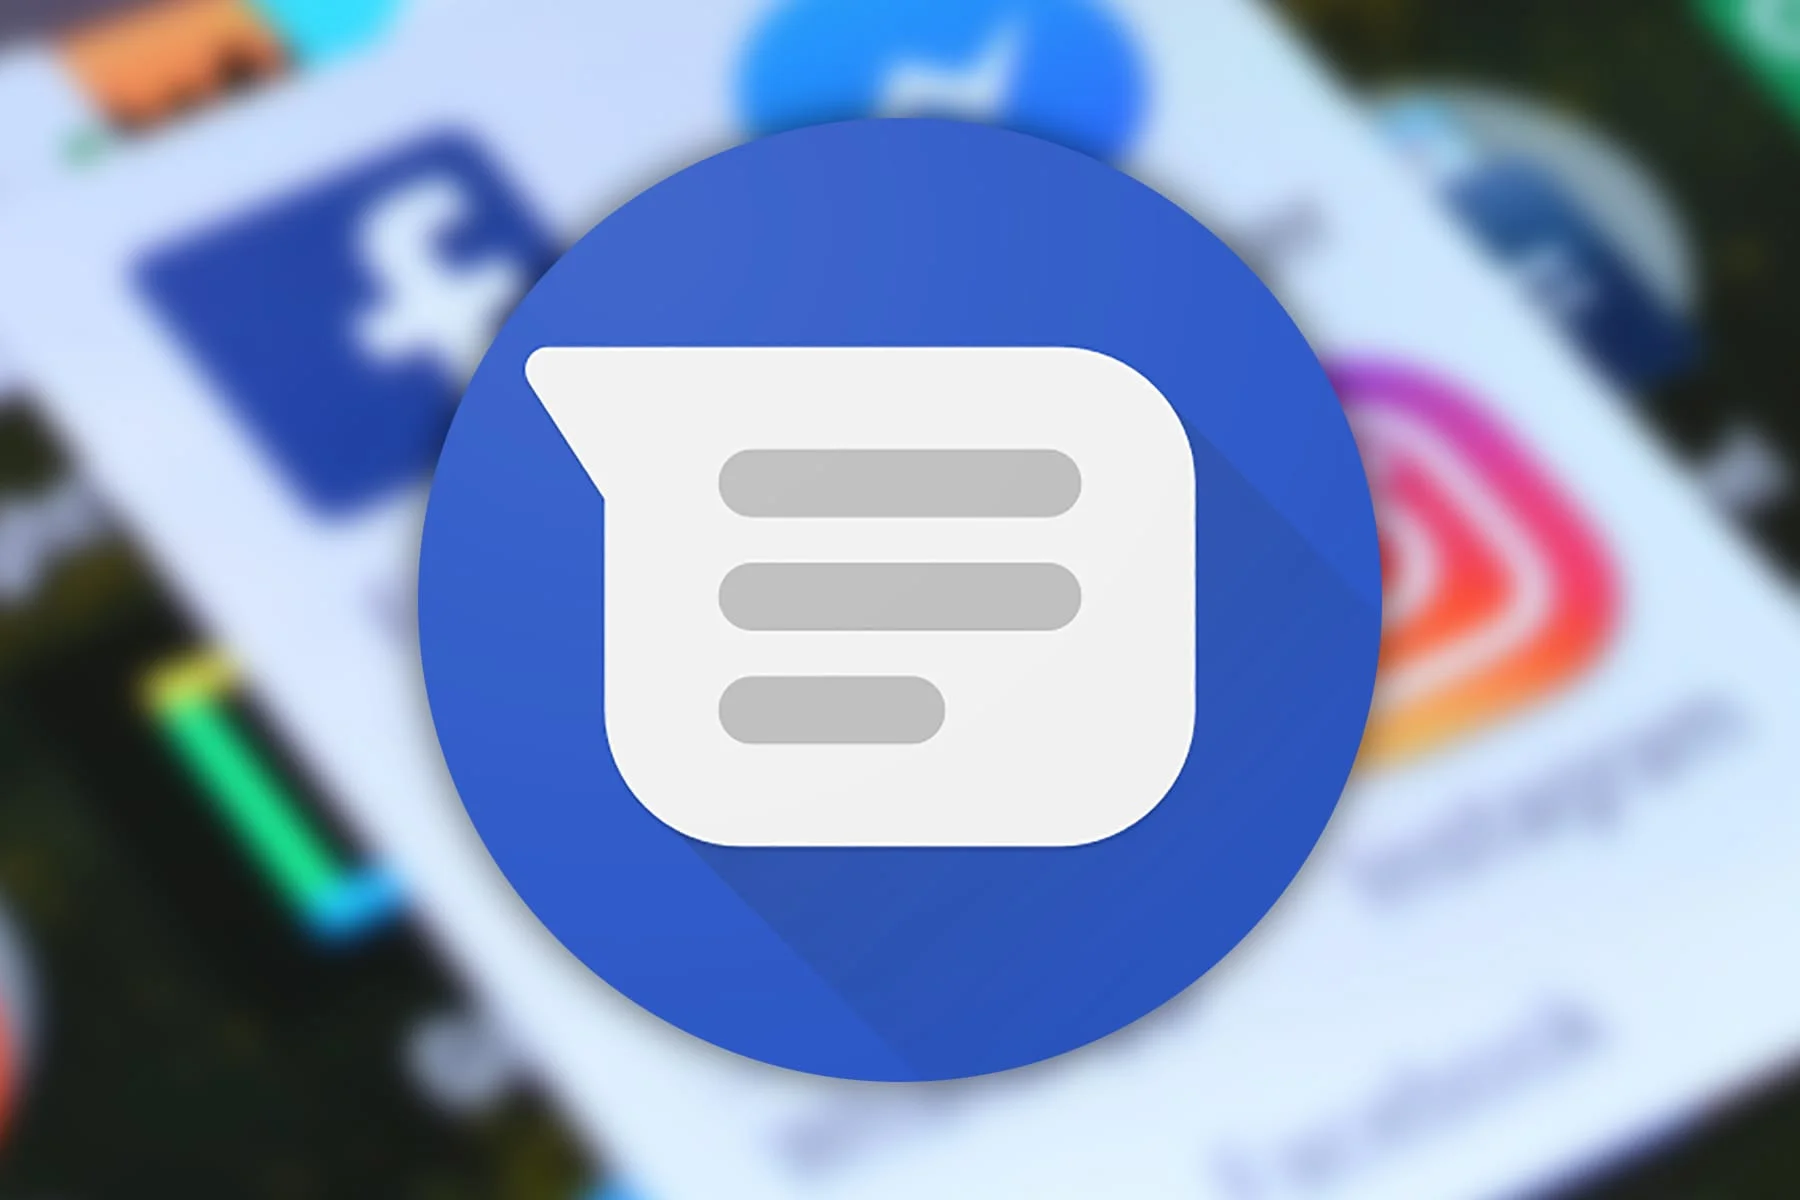 The functionality of competing applications will appear in the Google messenger